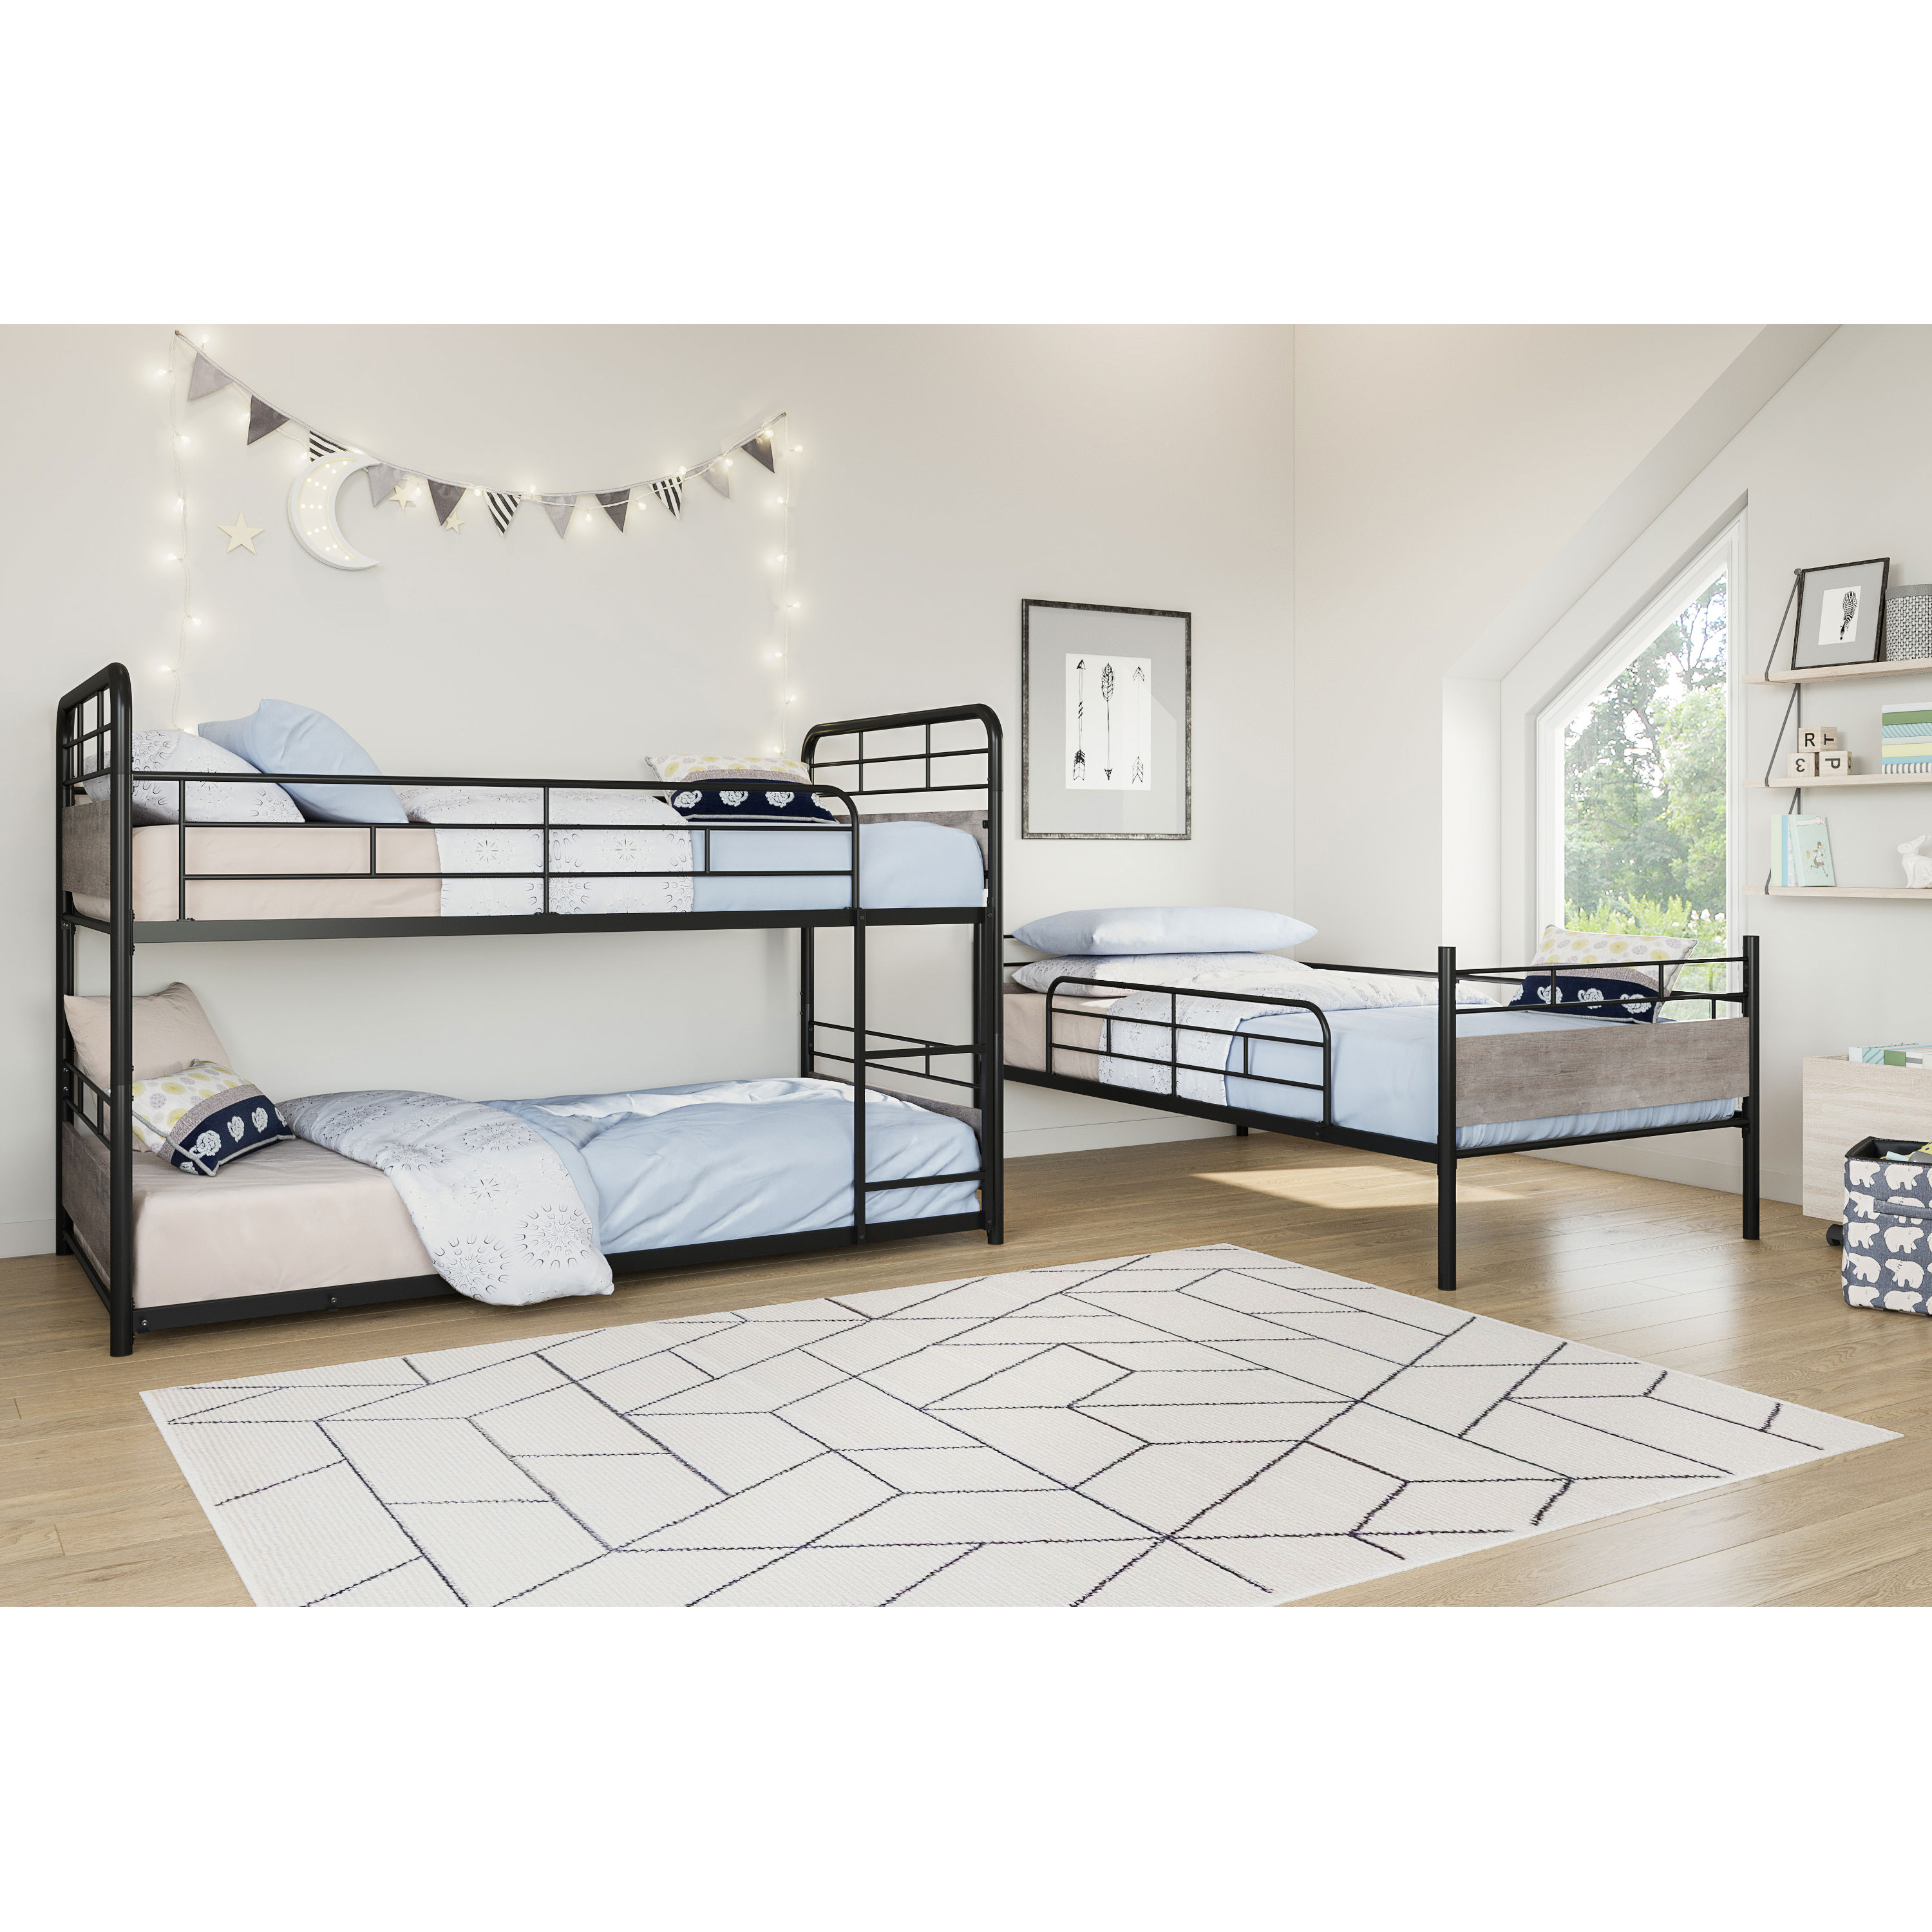 Better Homes & Gardens Anniston Convertible Black Metal Triple Twin Bunk Bed, Gray Wood Accents - image 16 of 26